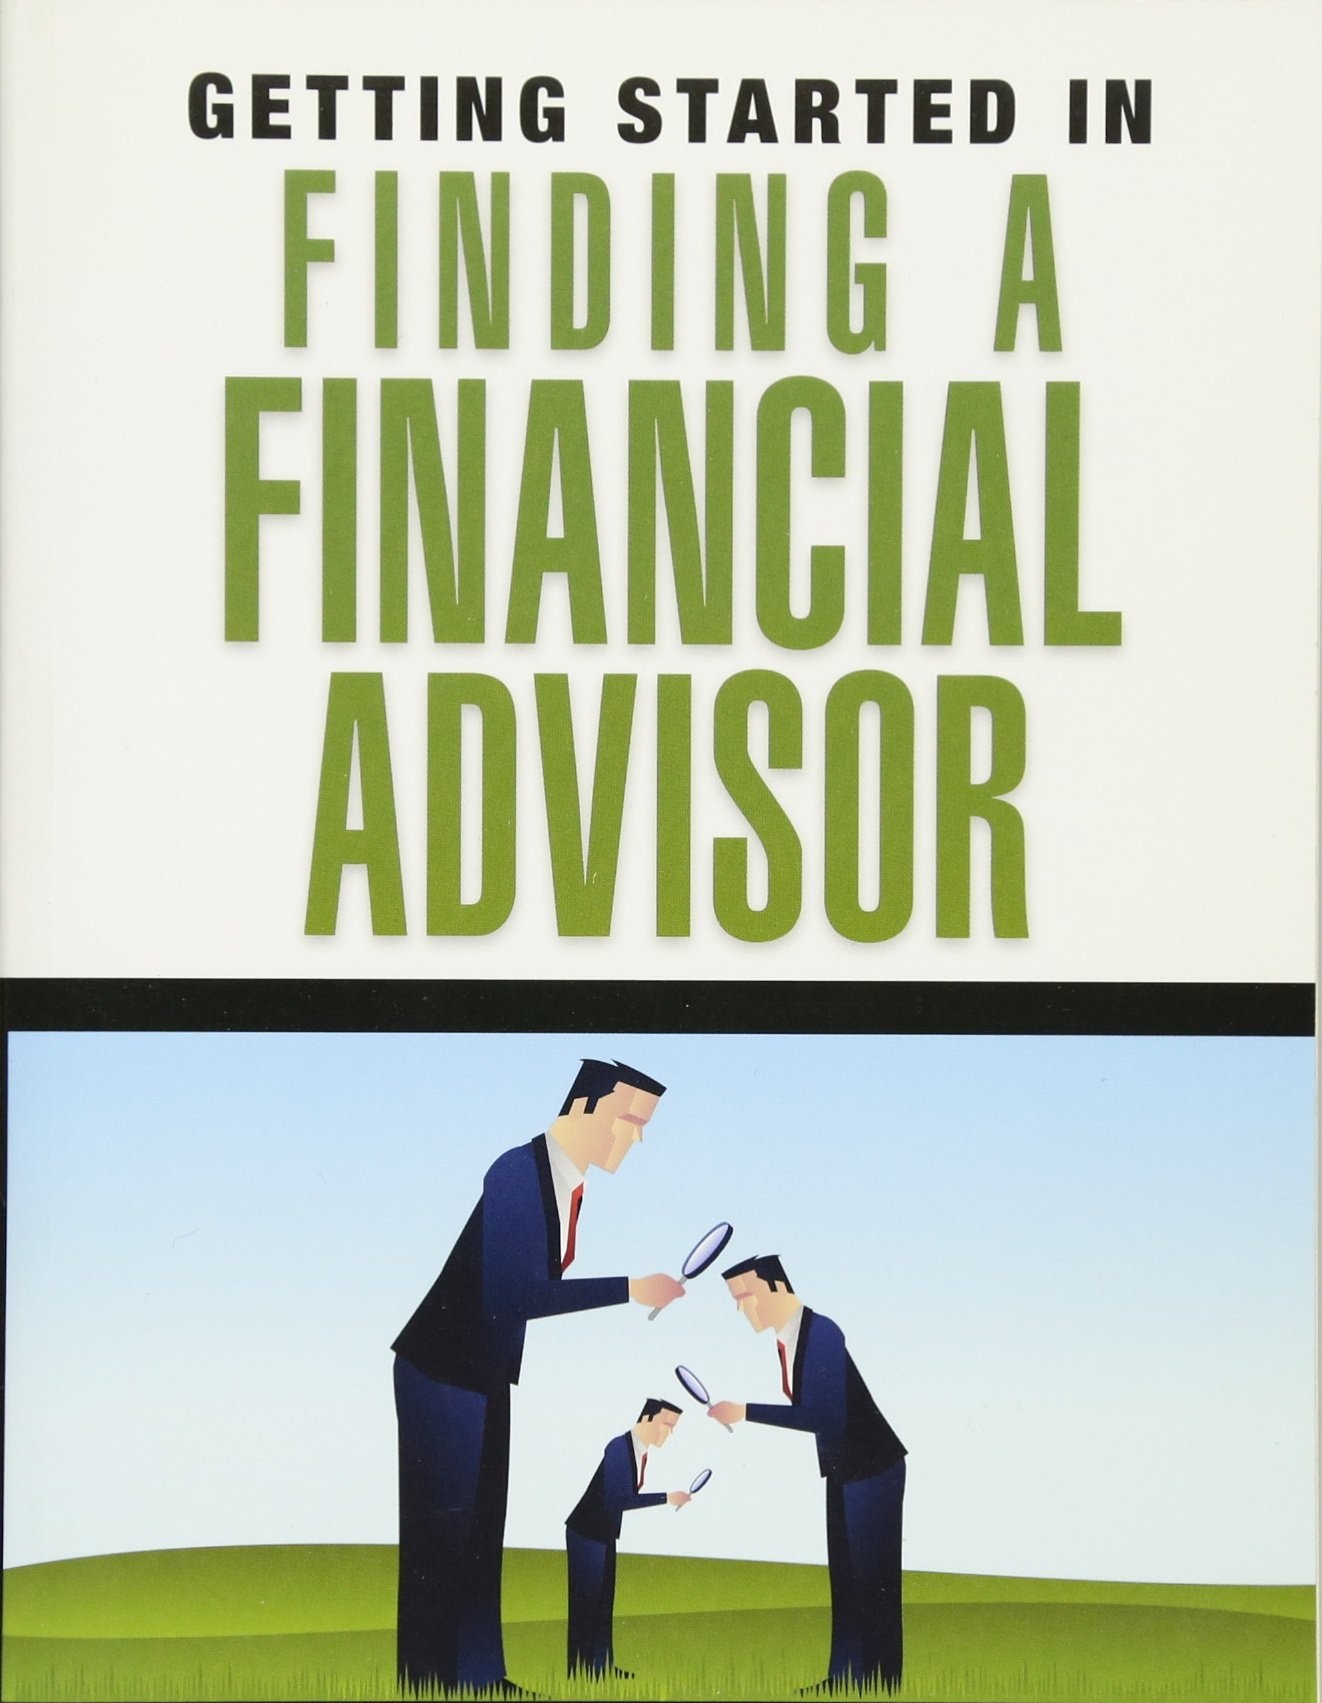 Three abstract figures searching for the right financial advisor